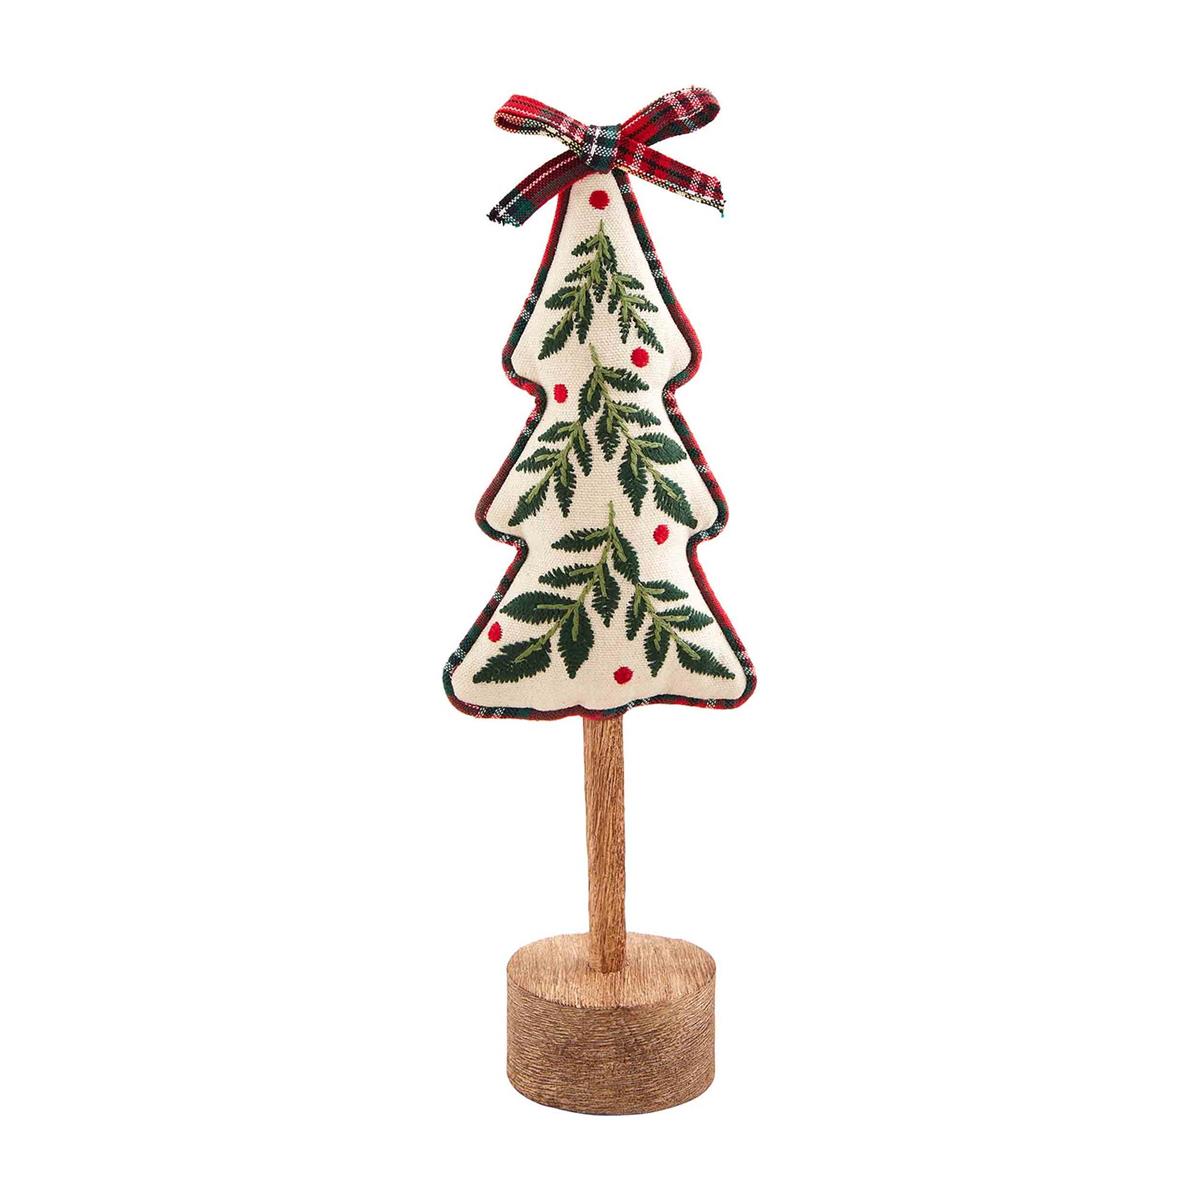 medium embroidered holly tree sitter displayed against a white background